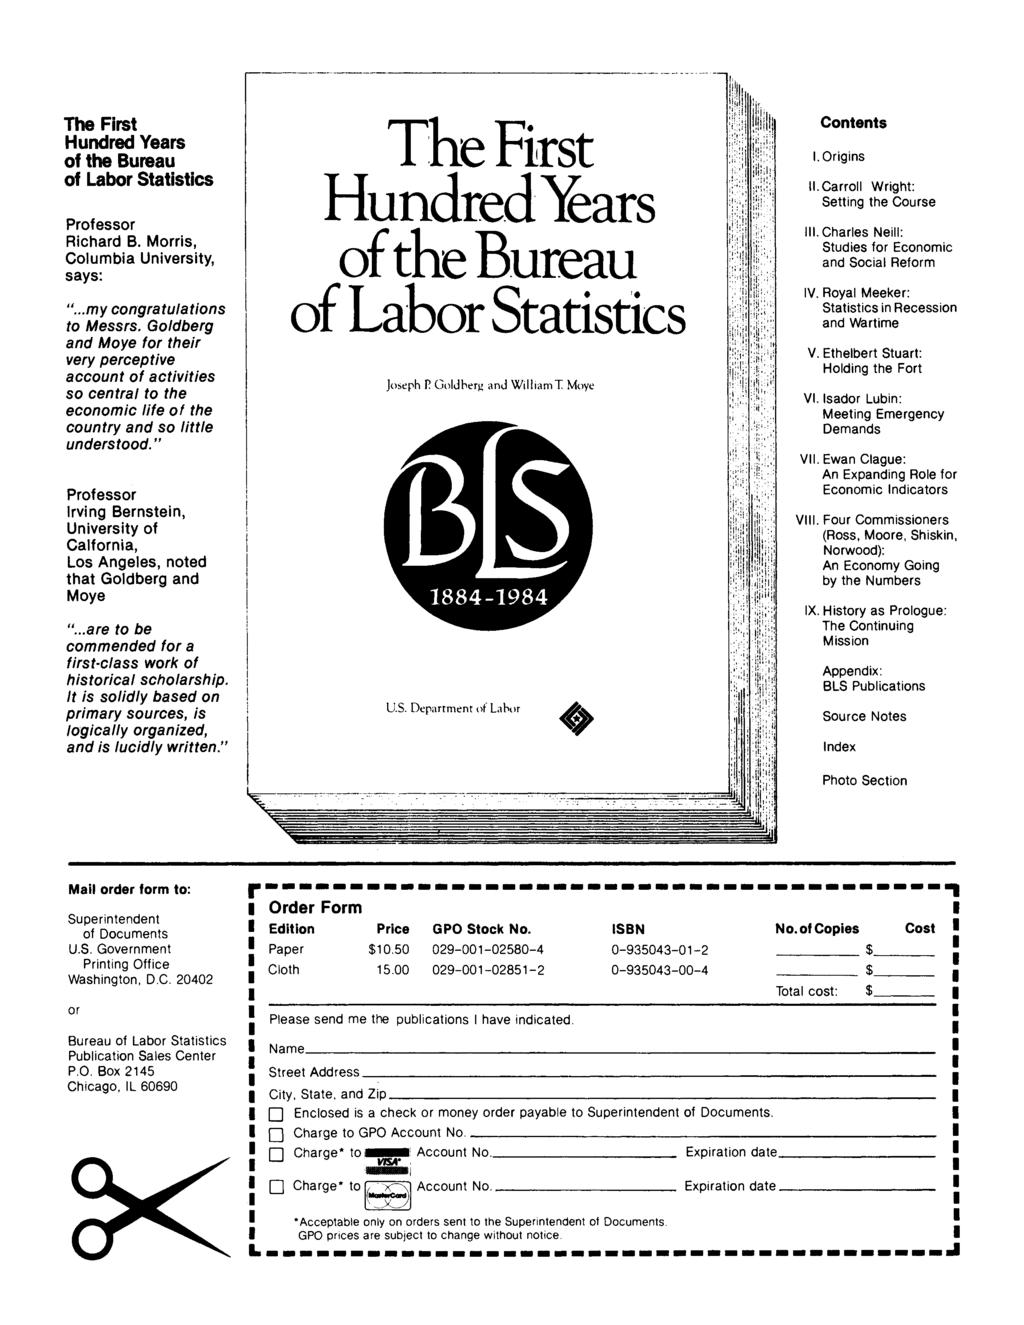 The First Hundred Years of the Bureau of Labor Statistics Professor Richard B. Morris, Columbia University, says: "...my congratulations to Messrs.